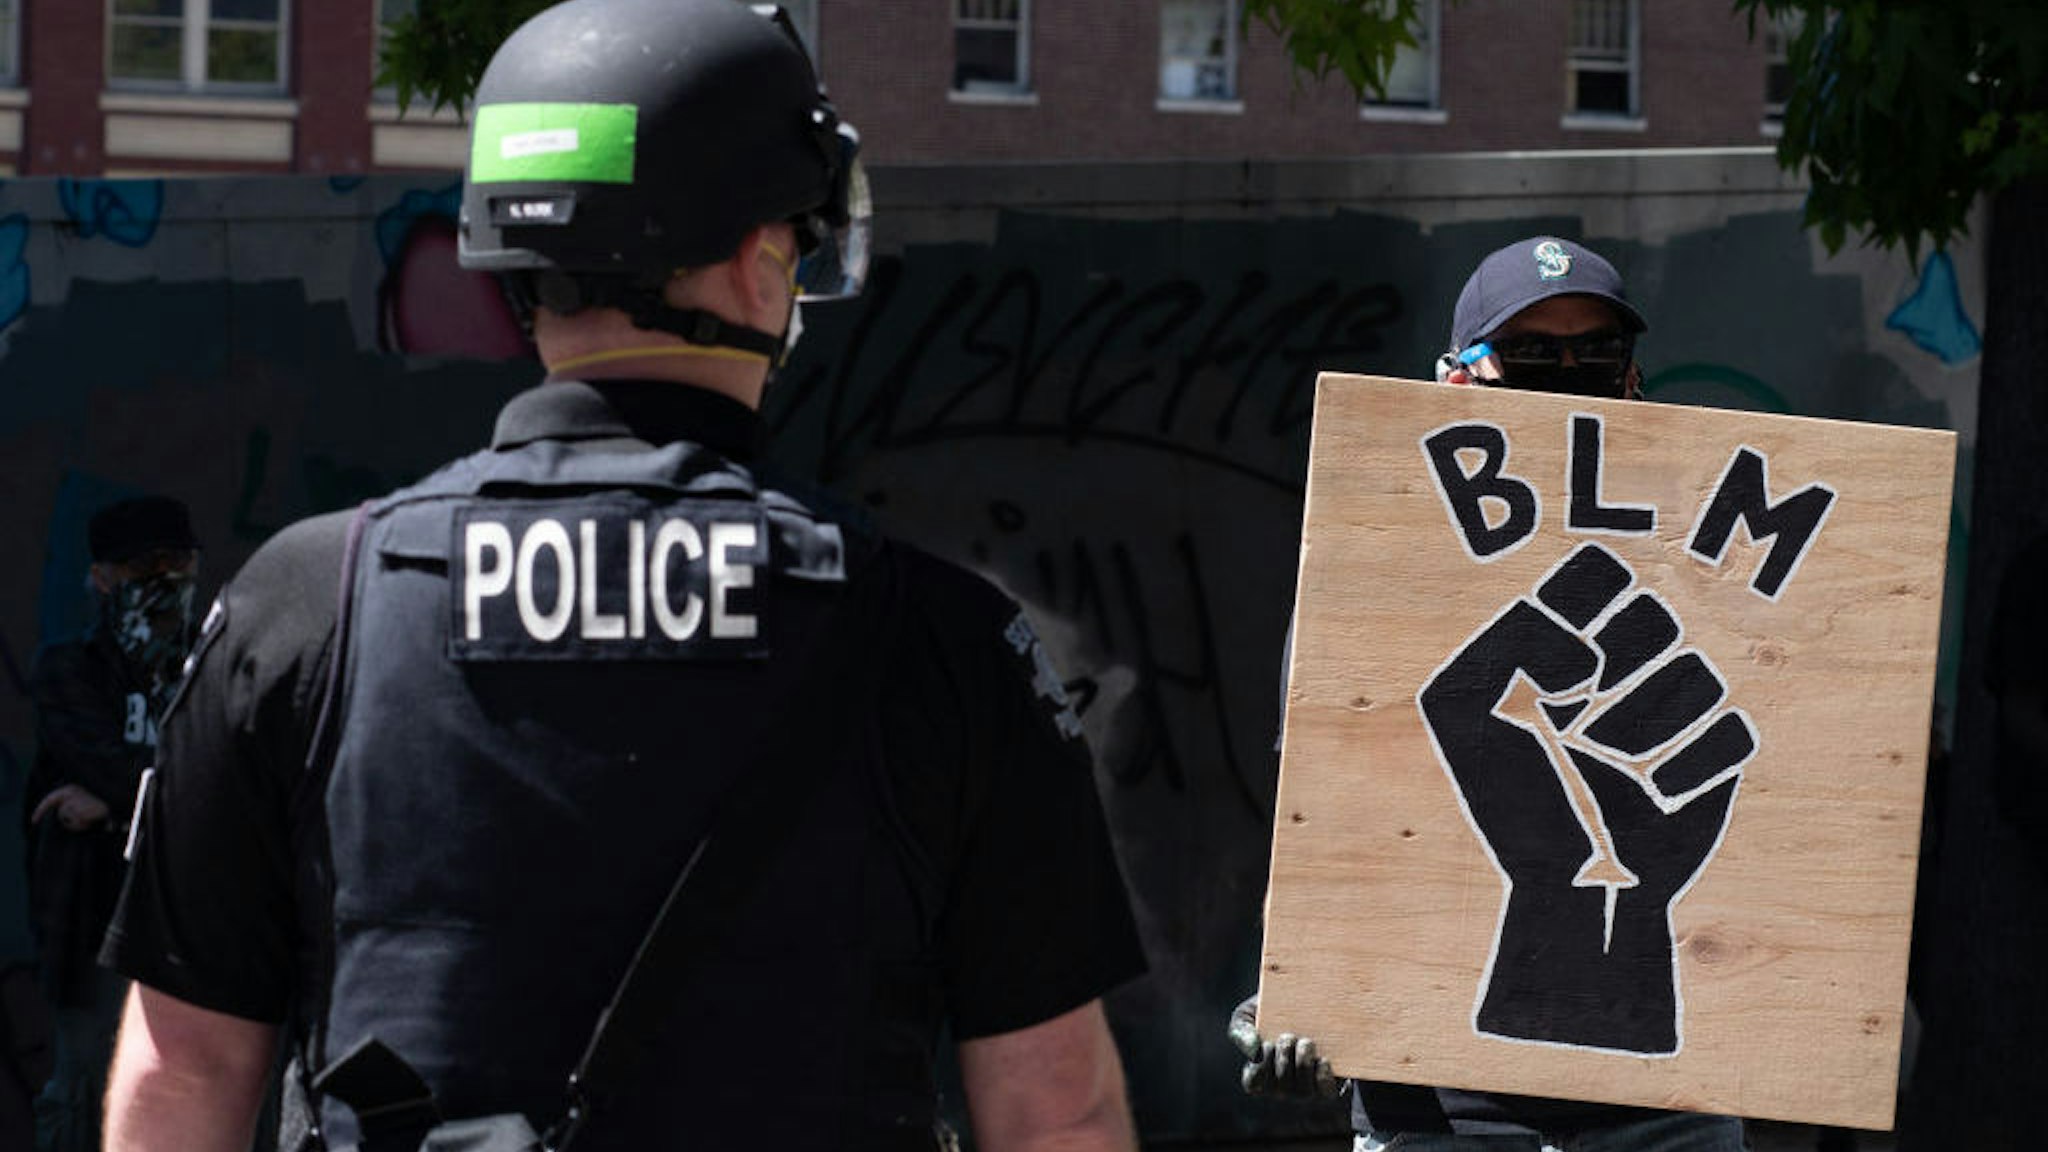 SEATTLE, WASHINGTON - AUGUST 9: A police officer stands in front of a Black Lives Matter sign during the Seattle Police Officers Guild√¢s rally to stop defunding of the Seattle Police Department on Sunday, August 9, 2020 at Seattle City Hall. The Seattle City Council passed a resolution to reduce the Seattle Police Department by up to 100 officers through layoffs but the council failed to pass a 50% cut of the Police Department√¢s remaining 2020 budget on August 5, 2020. (Photo by Noah Riffe/Anadolu Agency via Getty Images)